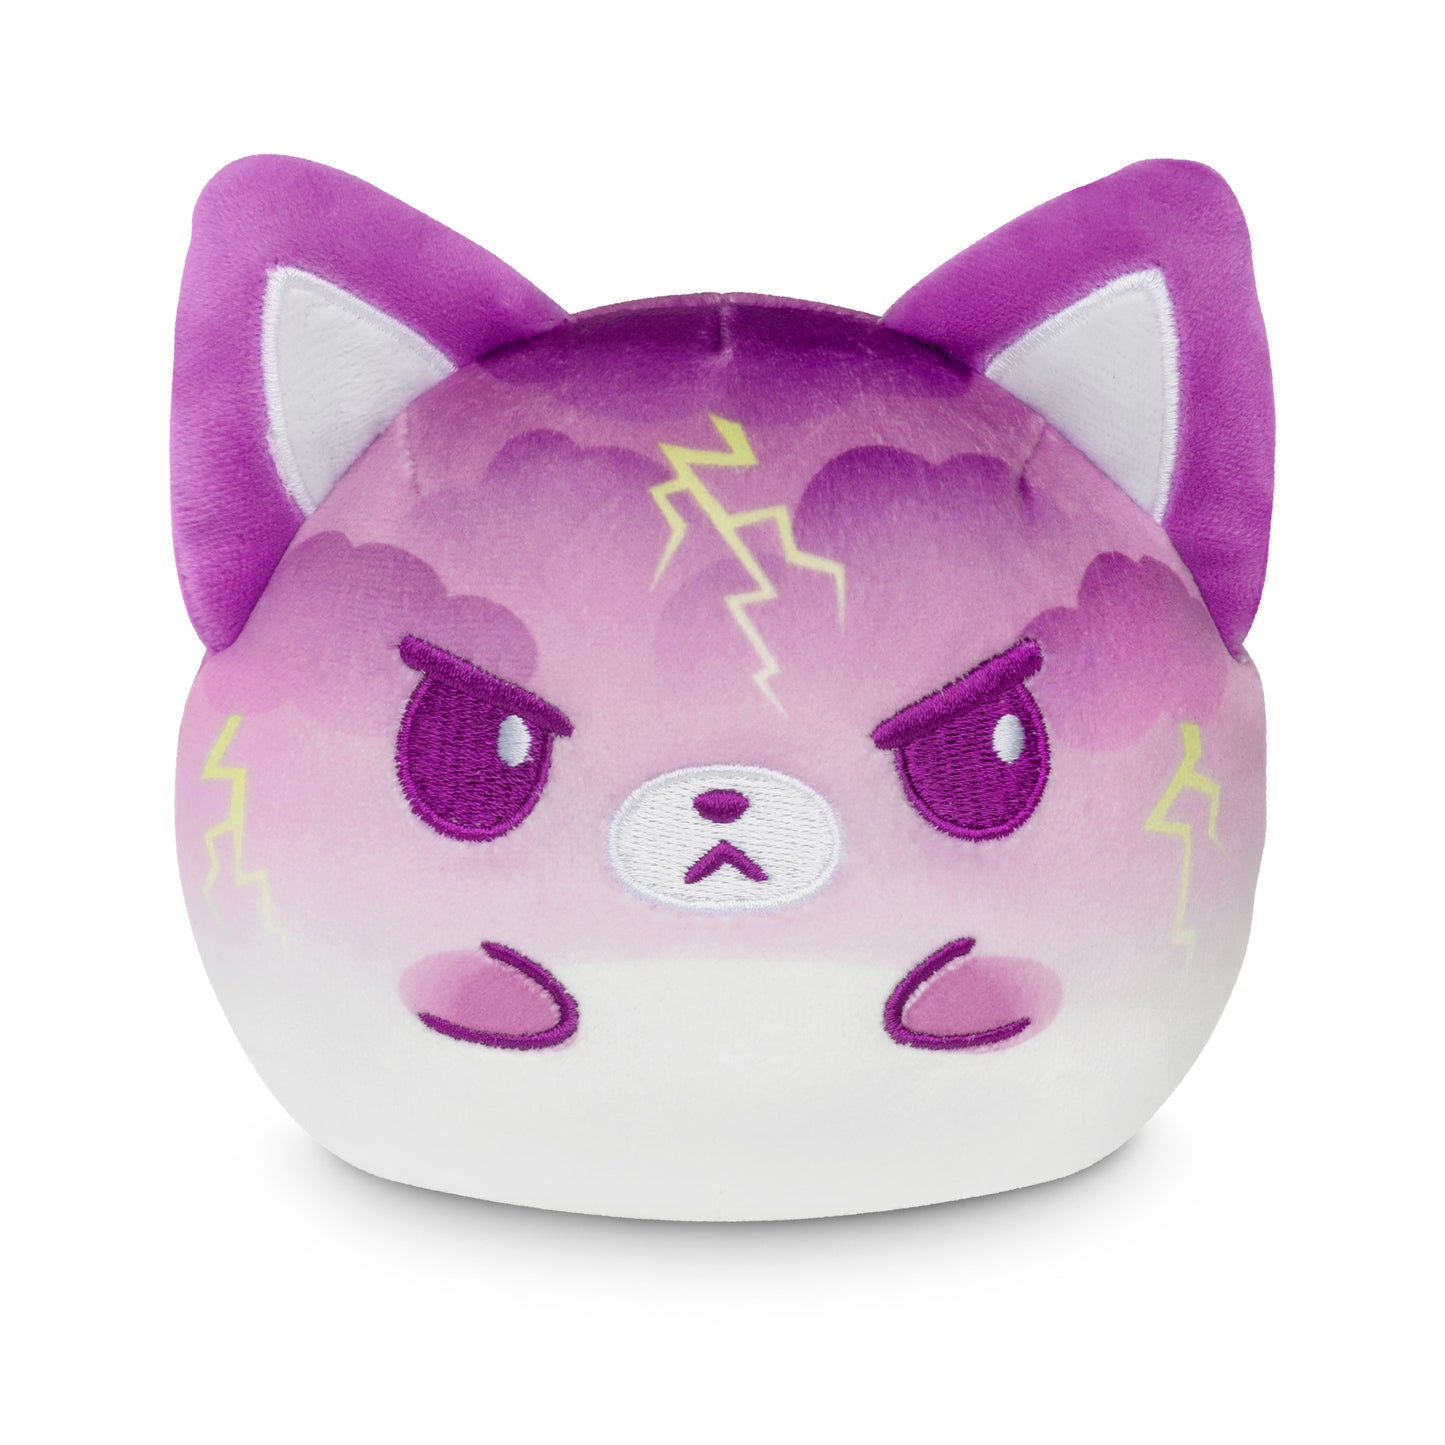 A reversible plush cat with lightning bolts on its face. 
Product: Plushiverse Rain or Shine Fox 4” Reversible Plushie
Brand: TeeTurtle